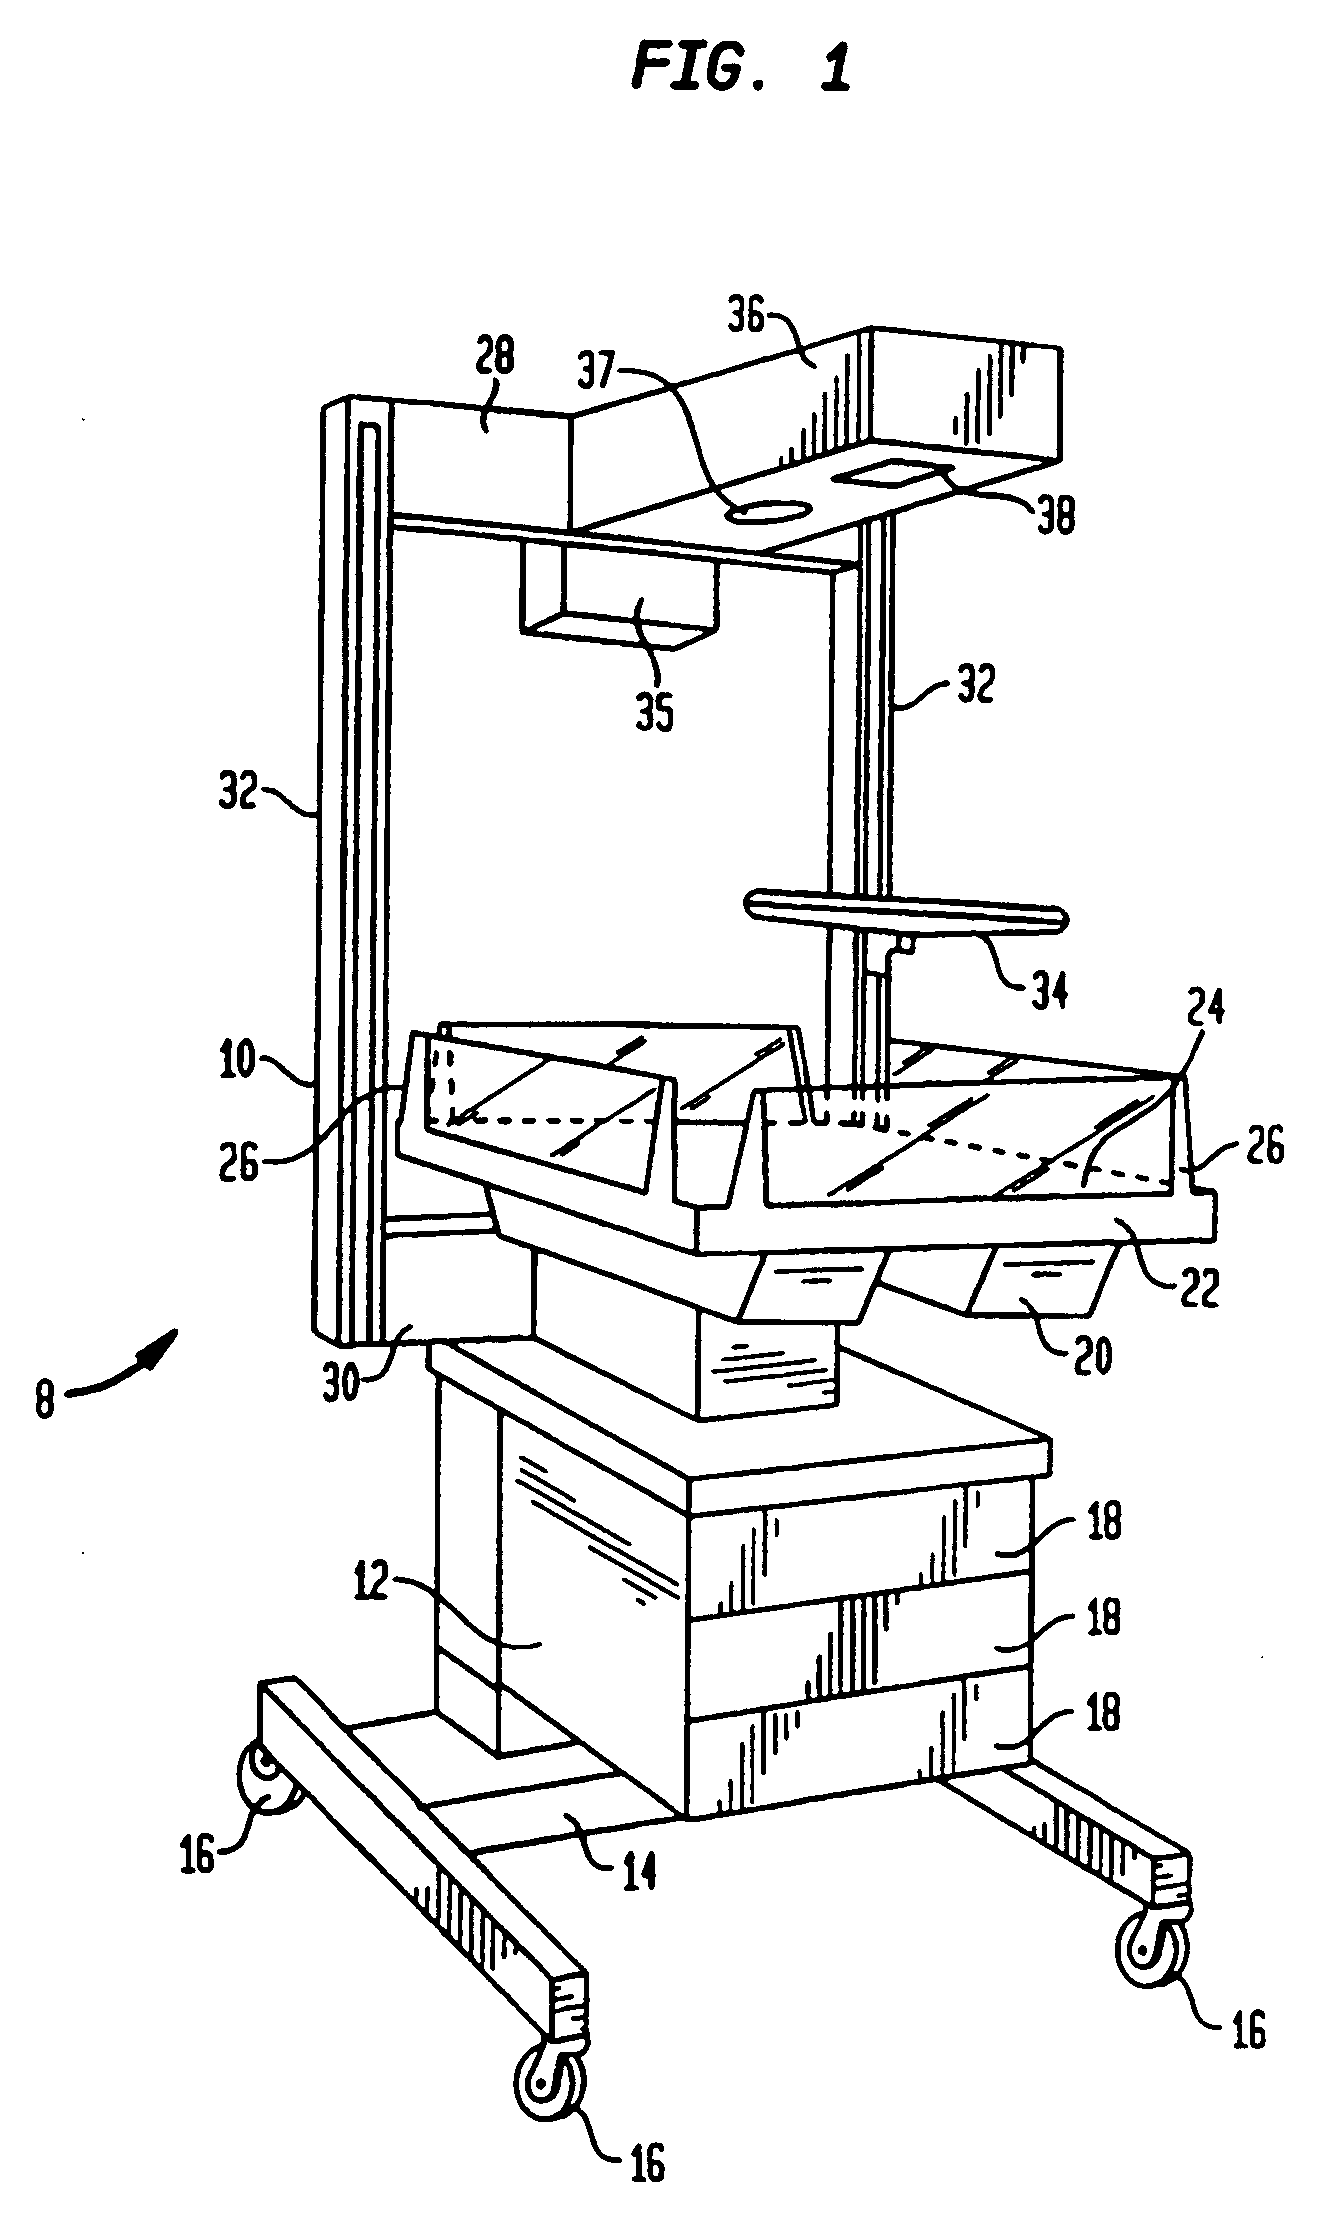 Delayed intensity light for infant care apparatus